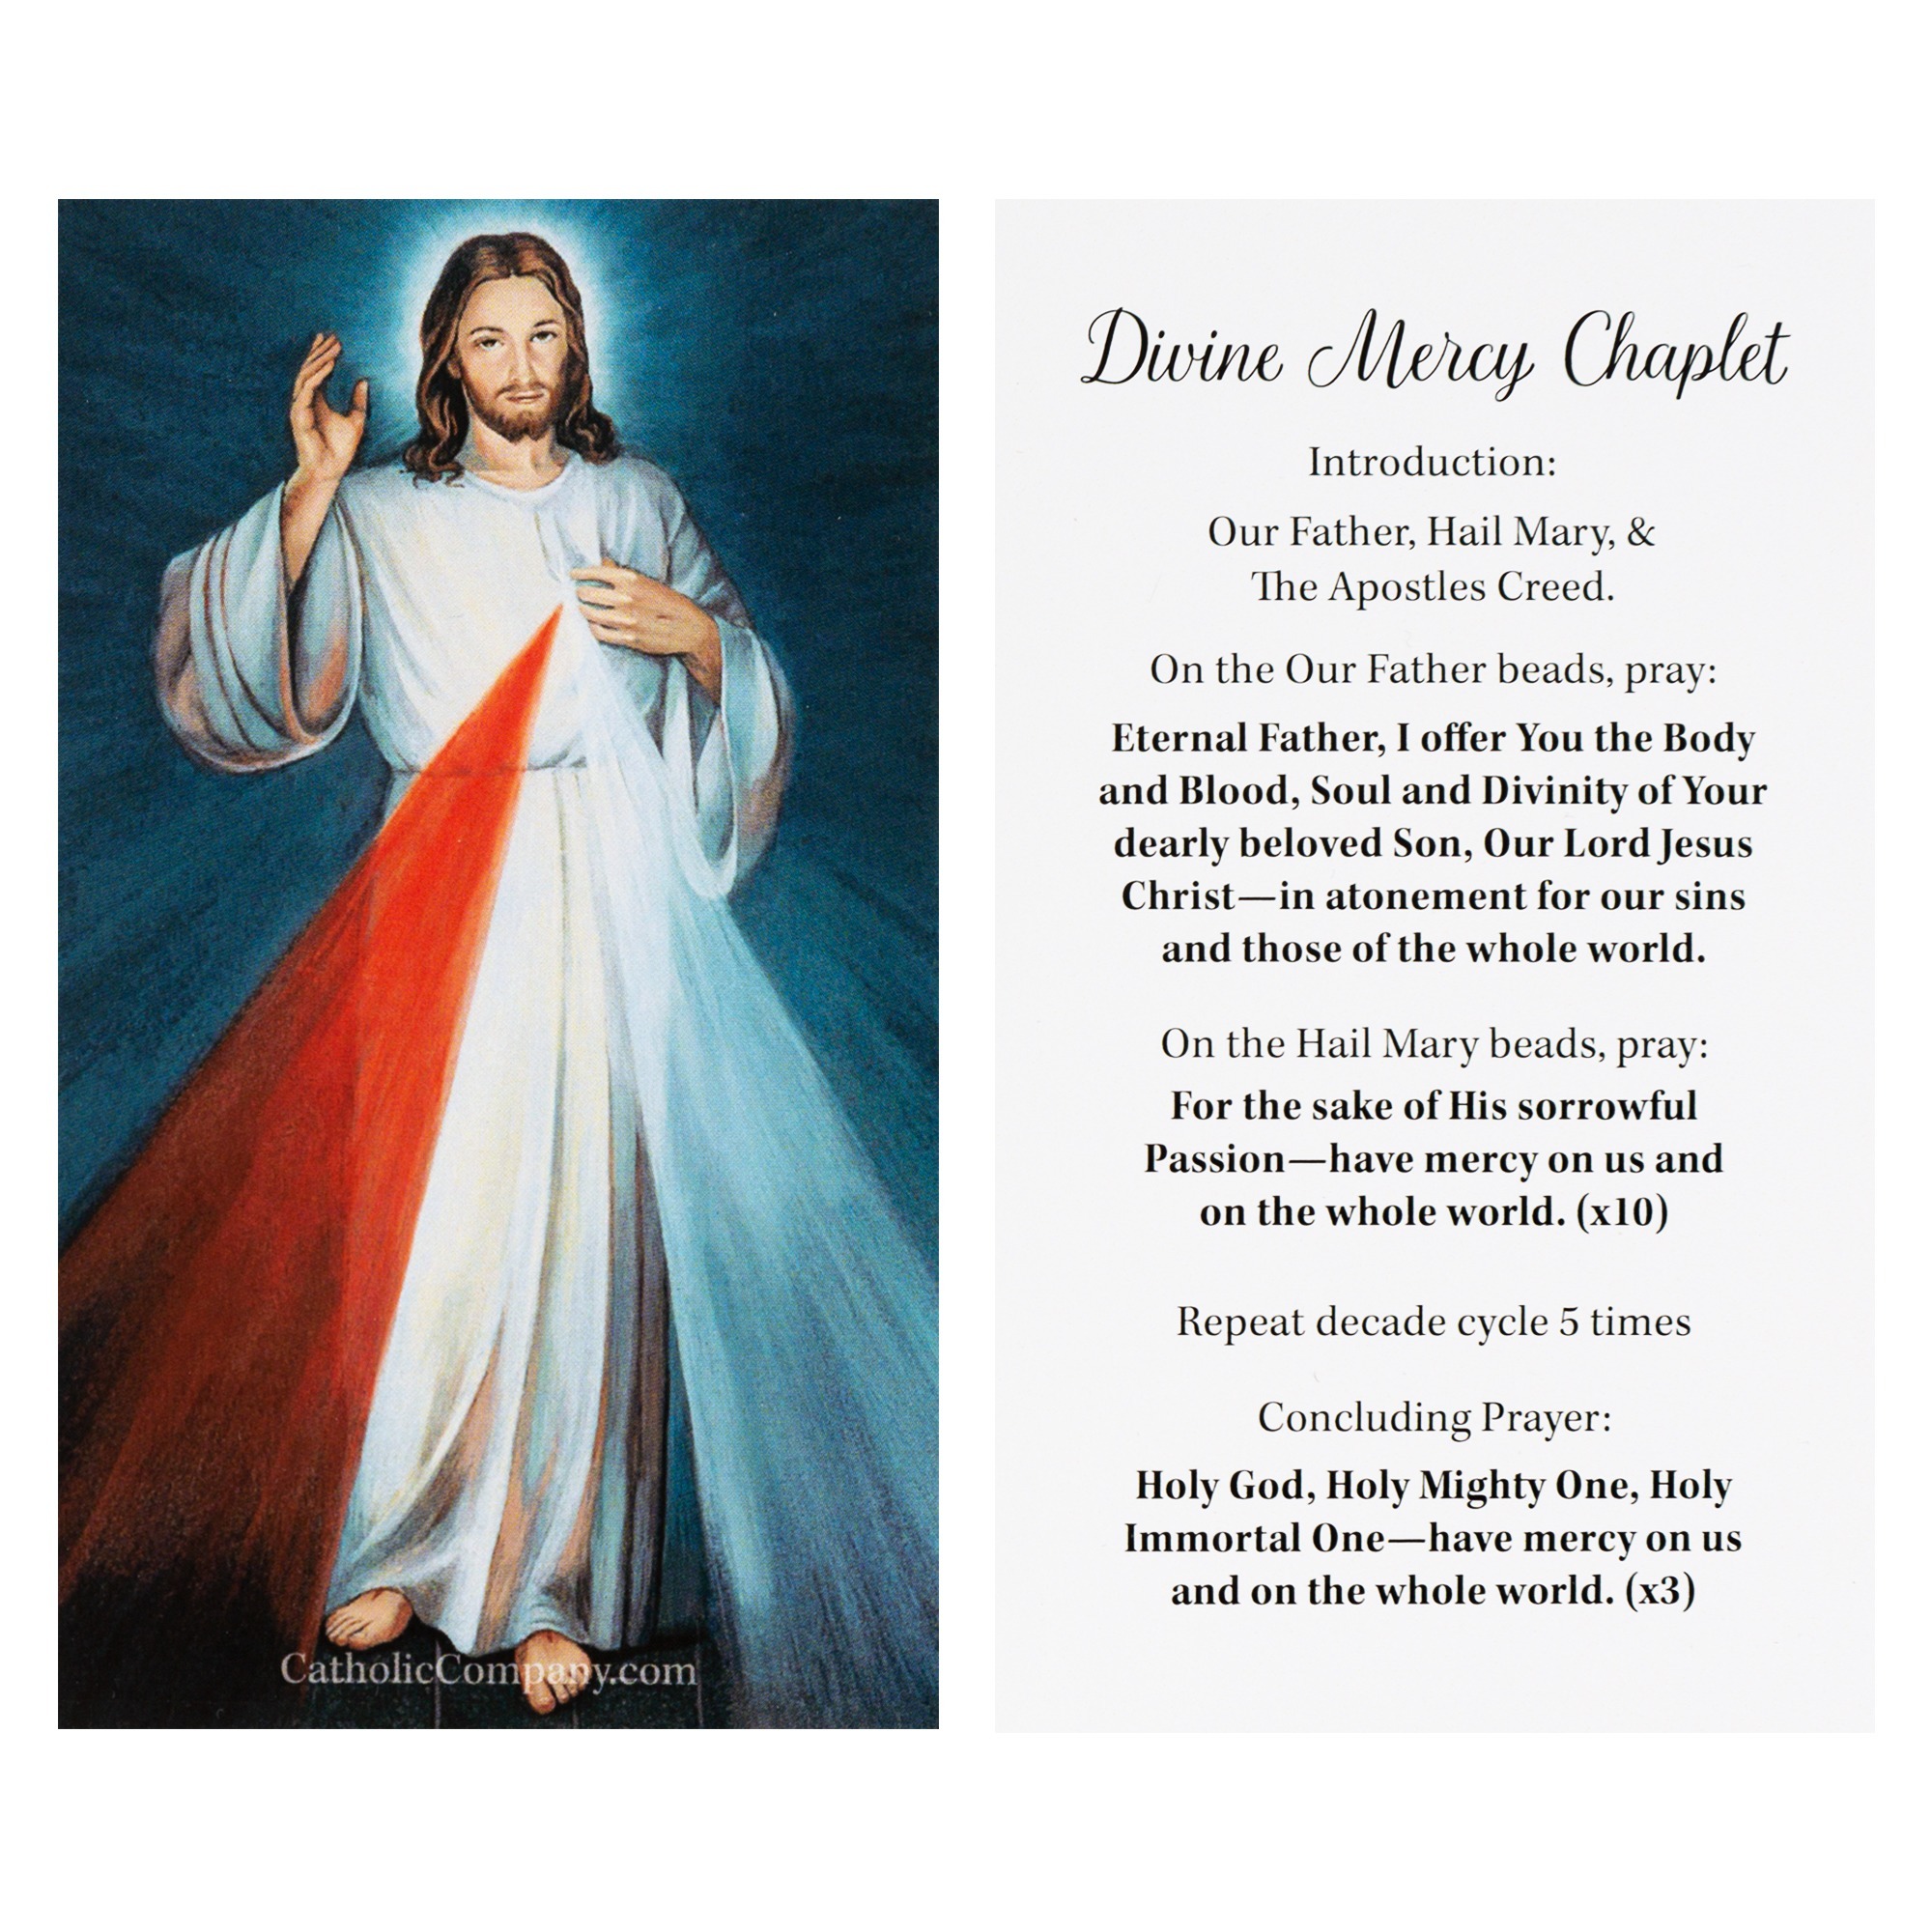 Divine Mercy Image and Chaplet Prayer Card The Catholic Company®